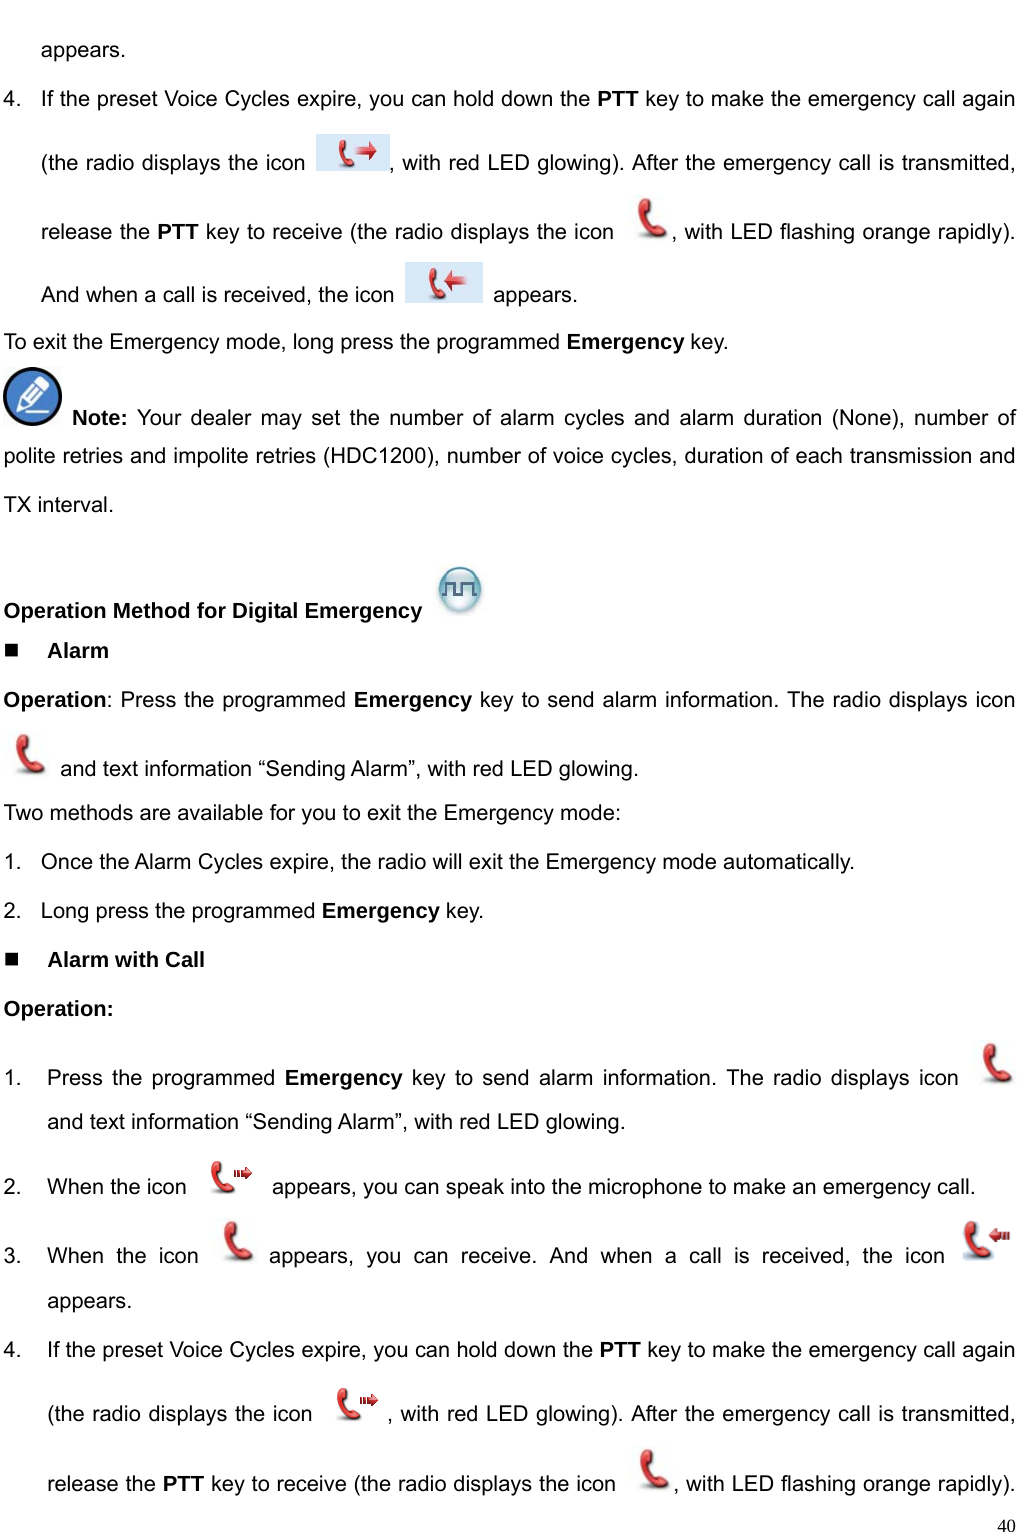                                                                                                              40appears.  4.  If the preset Voice Cycles expire, you can hold down the PTT key to make the emergency call again (the radio displays the icon  , with red LED glowing). After the emergency call is transmitted, release the PTT key to receive (the radio displays the icon  , with LED flashing orange rapidly). And when a call is received, the icon   appears.  To exit the Emergency mode, long press the programmed Emergency key.  Note: Your dealer may set the number of alarm cycles and alarm duration (None), number of polite retries and impolite retries (HDC1200), number of voice cycles, duration of each transmission and TX interval.    Operation Method for Digital Emergency    Alarm   Operation: Press the programmed Emergency key to send alarm information. The radio displays icon   and text information “Sending Alarm”, with red LED glowing.   Two methods are available for you to exit the Emergency mode:   1.  Once the Alarm Cycles expire, the radio will exit the Emergency mode automatically.   2.  Long press the programmed Emergency key.  Alarm with Call   Operation:  1.  Press the programmed Emergency key to send alarm information. The radio displays icon   and text information “Sending Alarm”, with red LED glowing.   2.  When the icon    appears, you can speak into the microphone to make an emergency call.   3.  When the icon   appears, you can receive. And when a call is received, the icon   appears. 4.  If the preset Voice Cycles expire, you can hold down the PTT key to make the emergency call again (the radio displays the icon  , with red LED glowing). After the emergency call is transmitted, release the PTT key to receive (the radio displays the icon  , with LED flashing orange rapidly). 